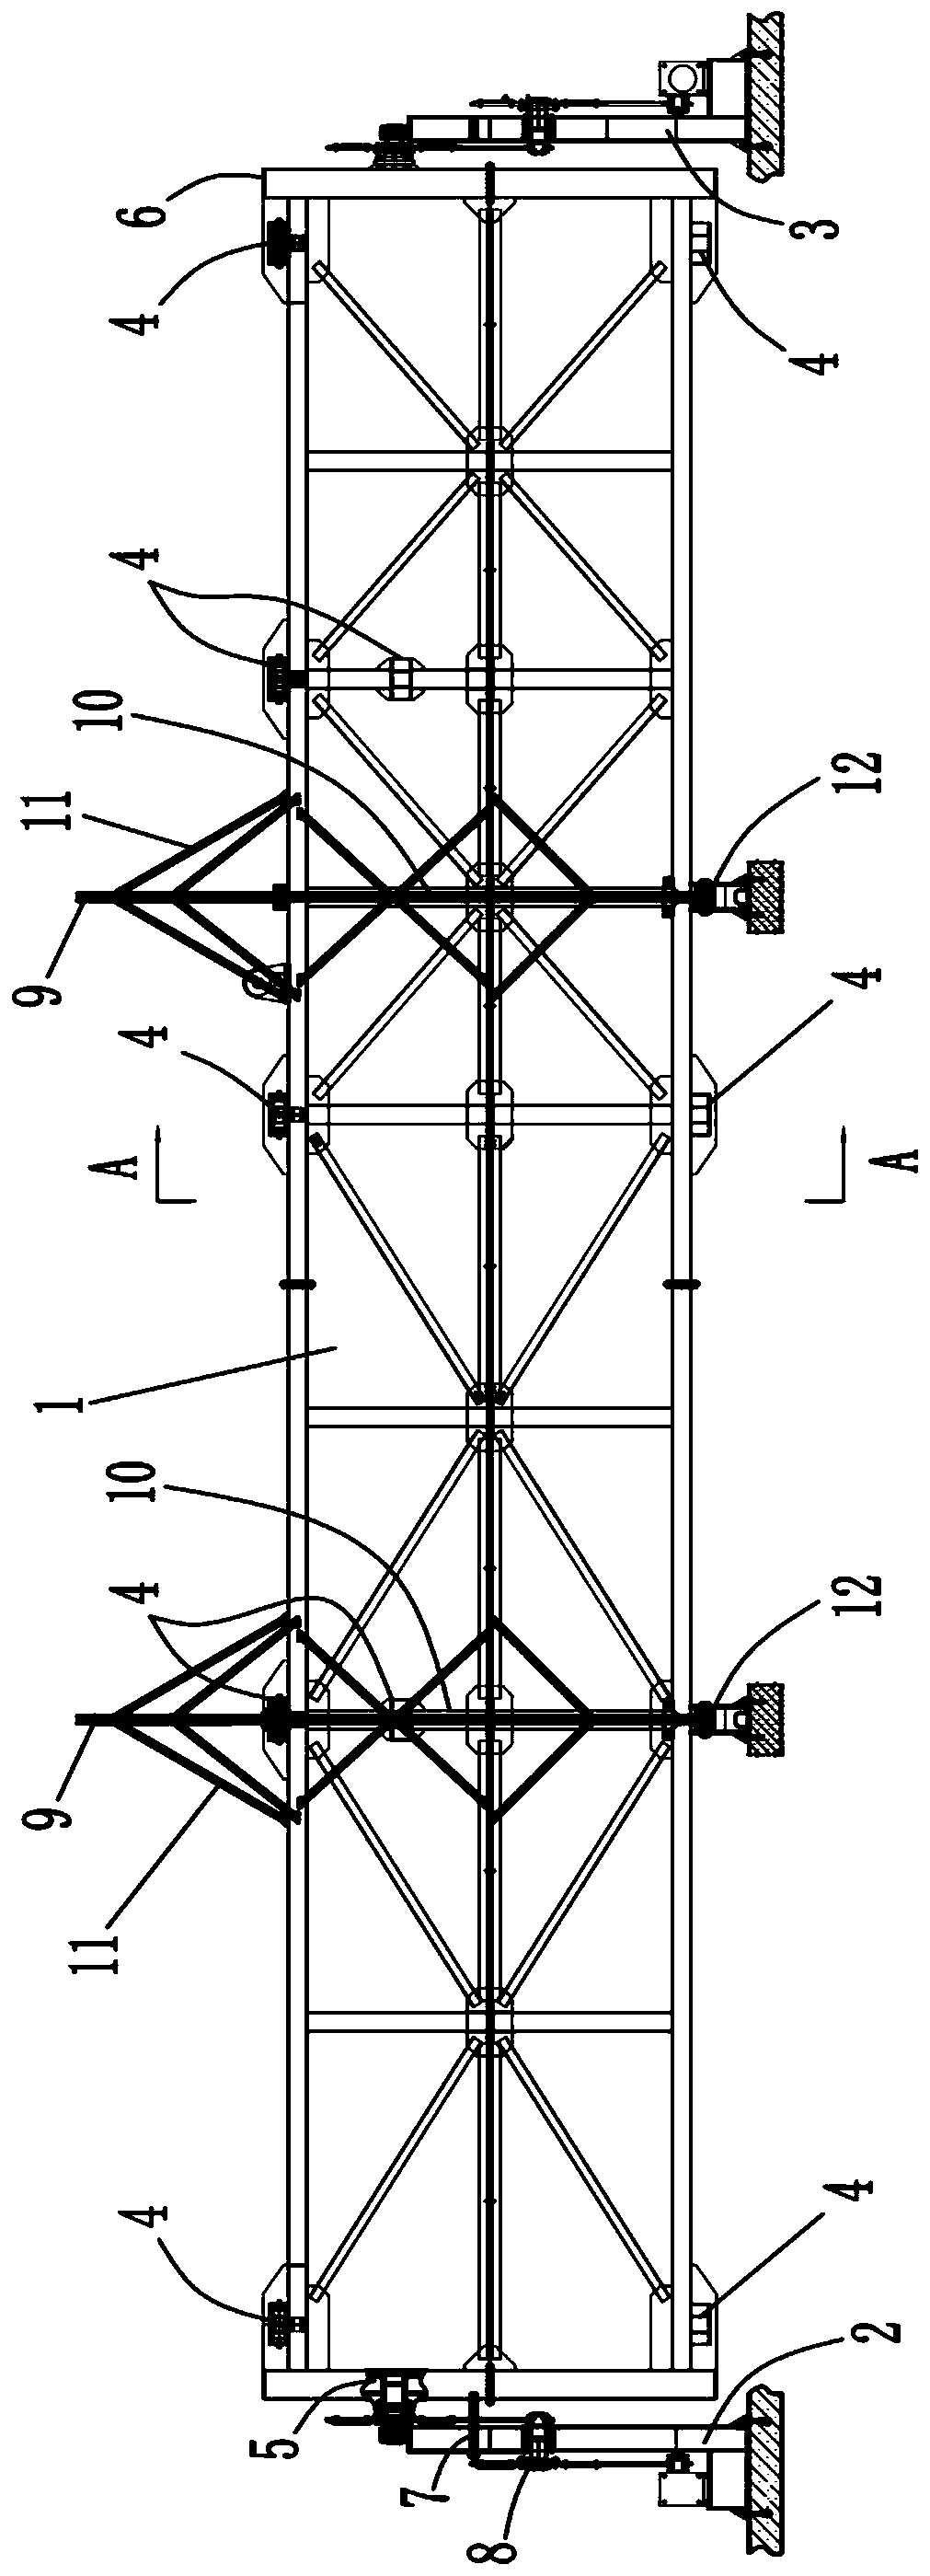 A turning mechanism and turning method suitable for an assembled underpass tunnel